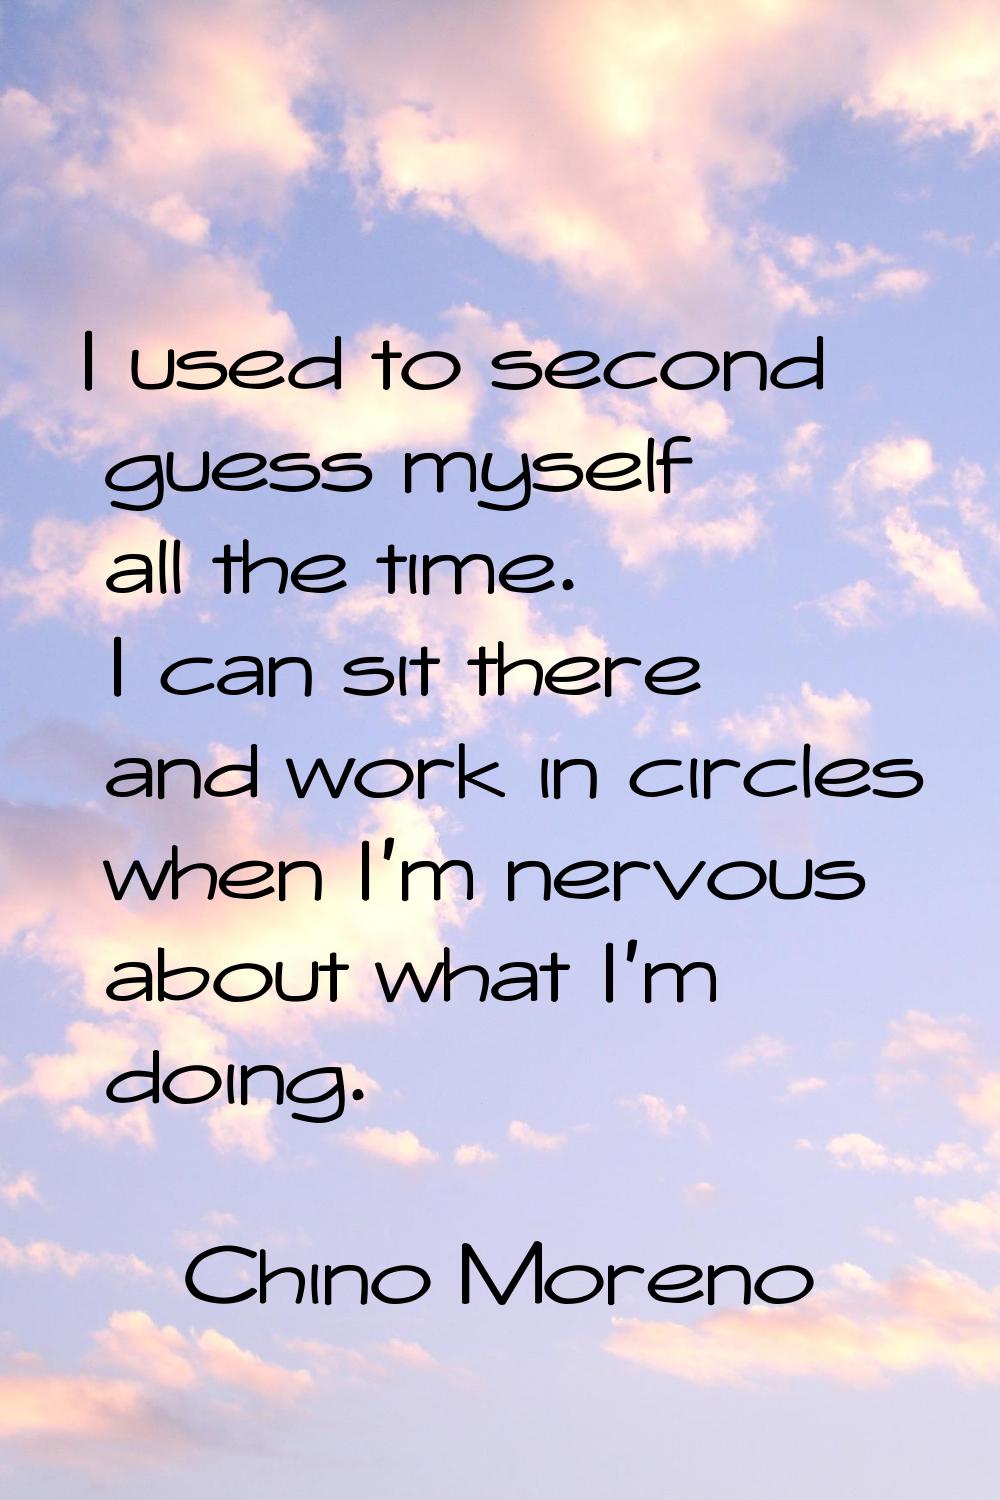 I used to second guess myself all the time. I can sit there and work in circles when I'm nervous ab